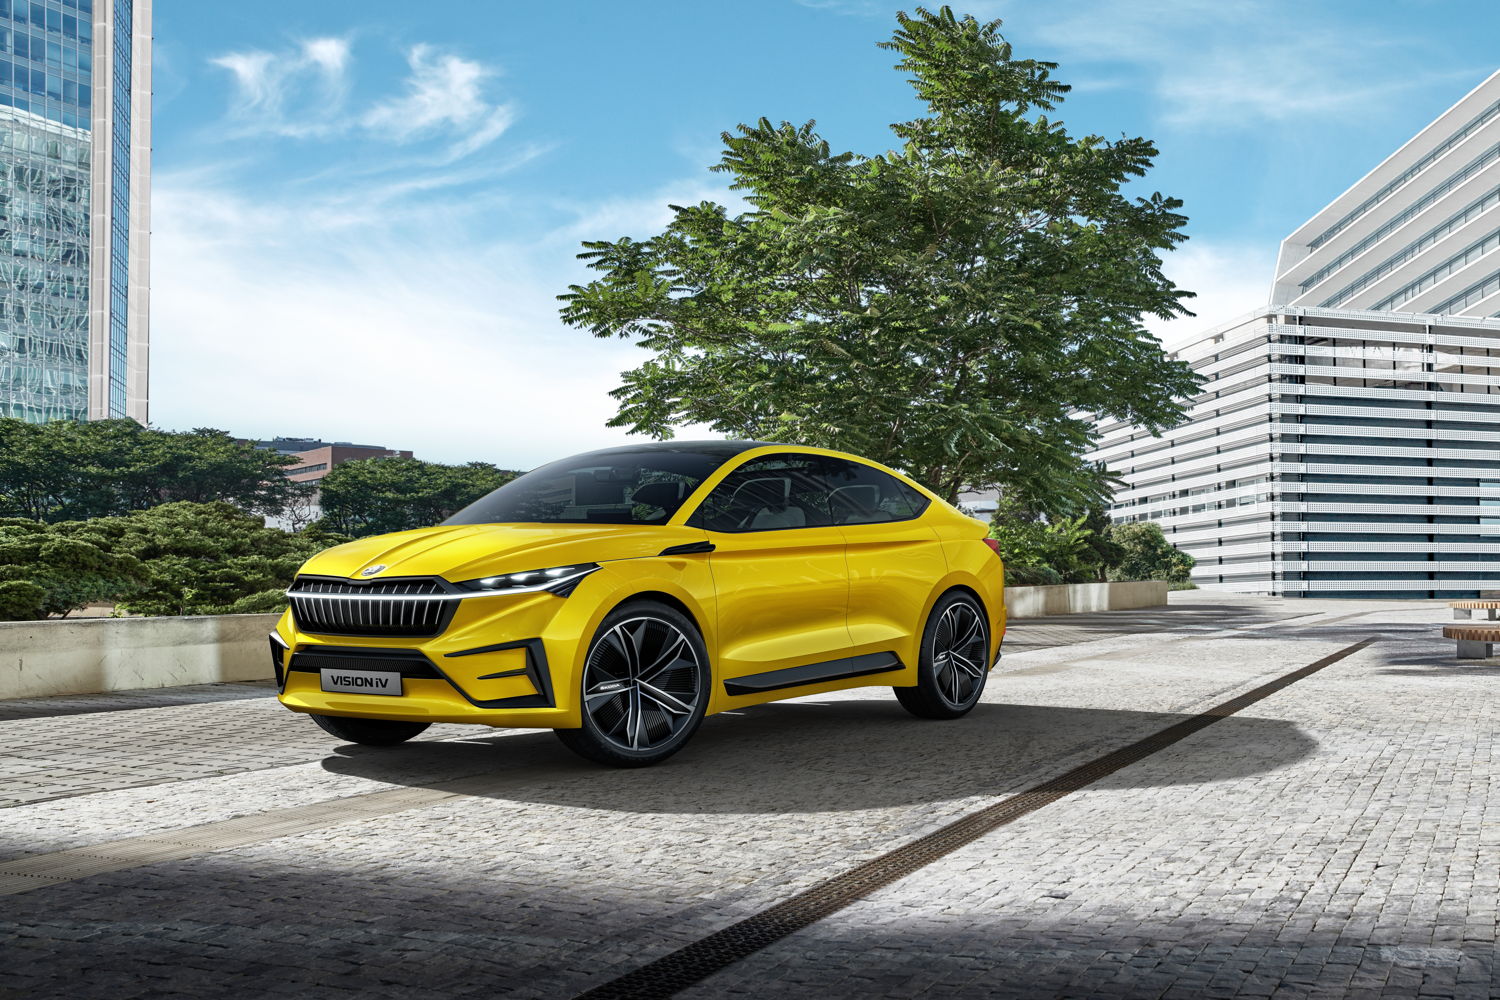 ŠKODA AUTO is continuing along its path towards electromobility in 2020, presenting the series-production version of the VISION iV in the first half of the year. The 125th anniversary of the company's founding thus also marks the beginning of a new era for the manufacturer: the all-electric SUV is the brand's first vehicle to be based on the Volkswagen Group's Modular Electric Platform.